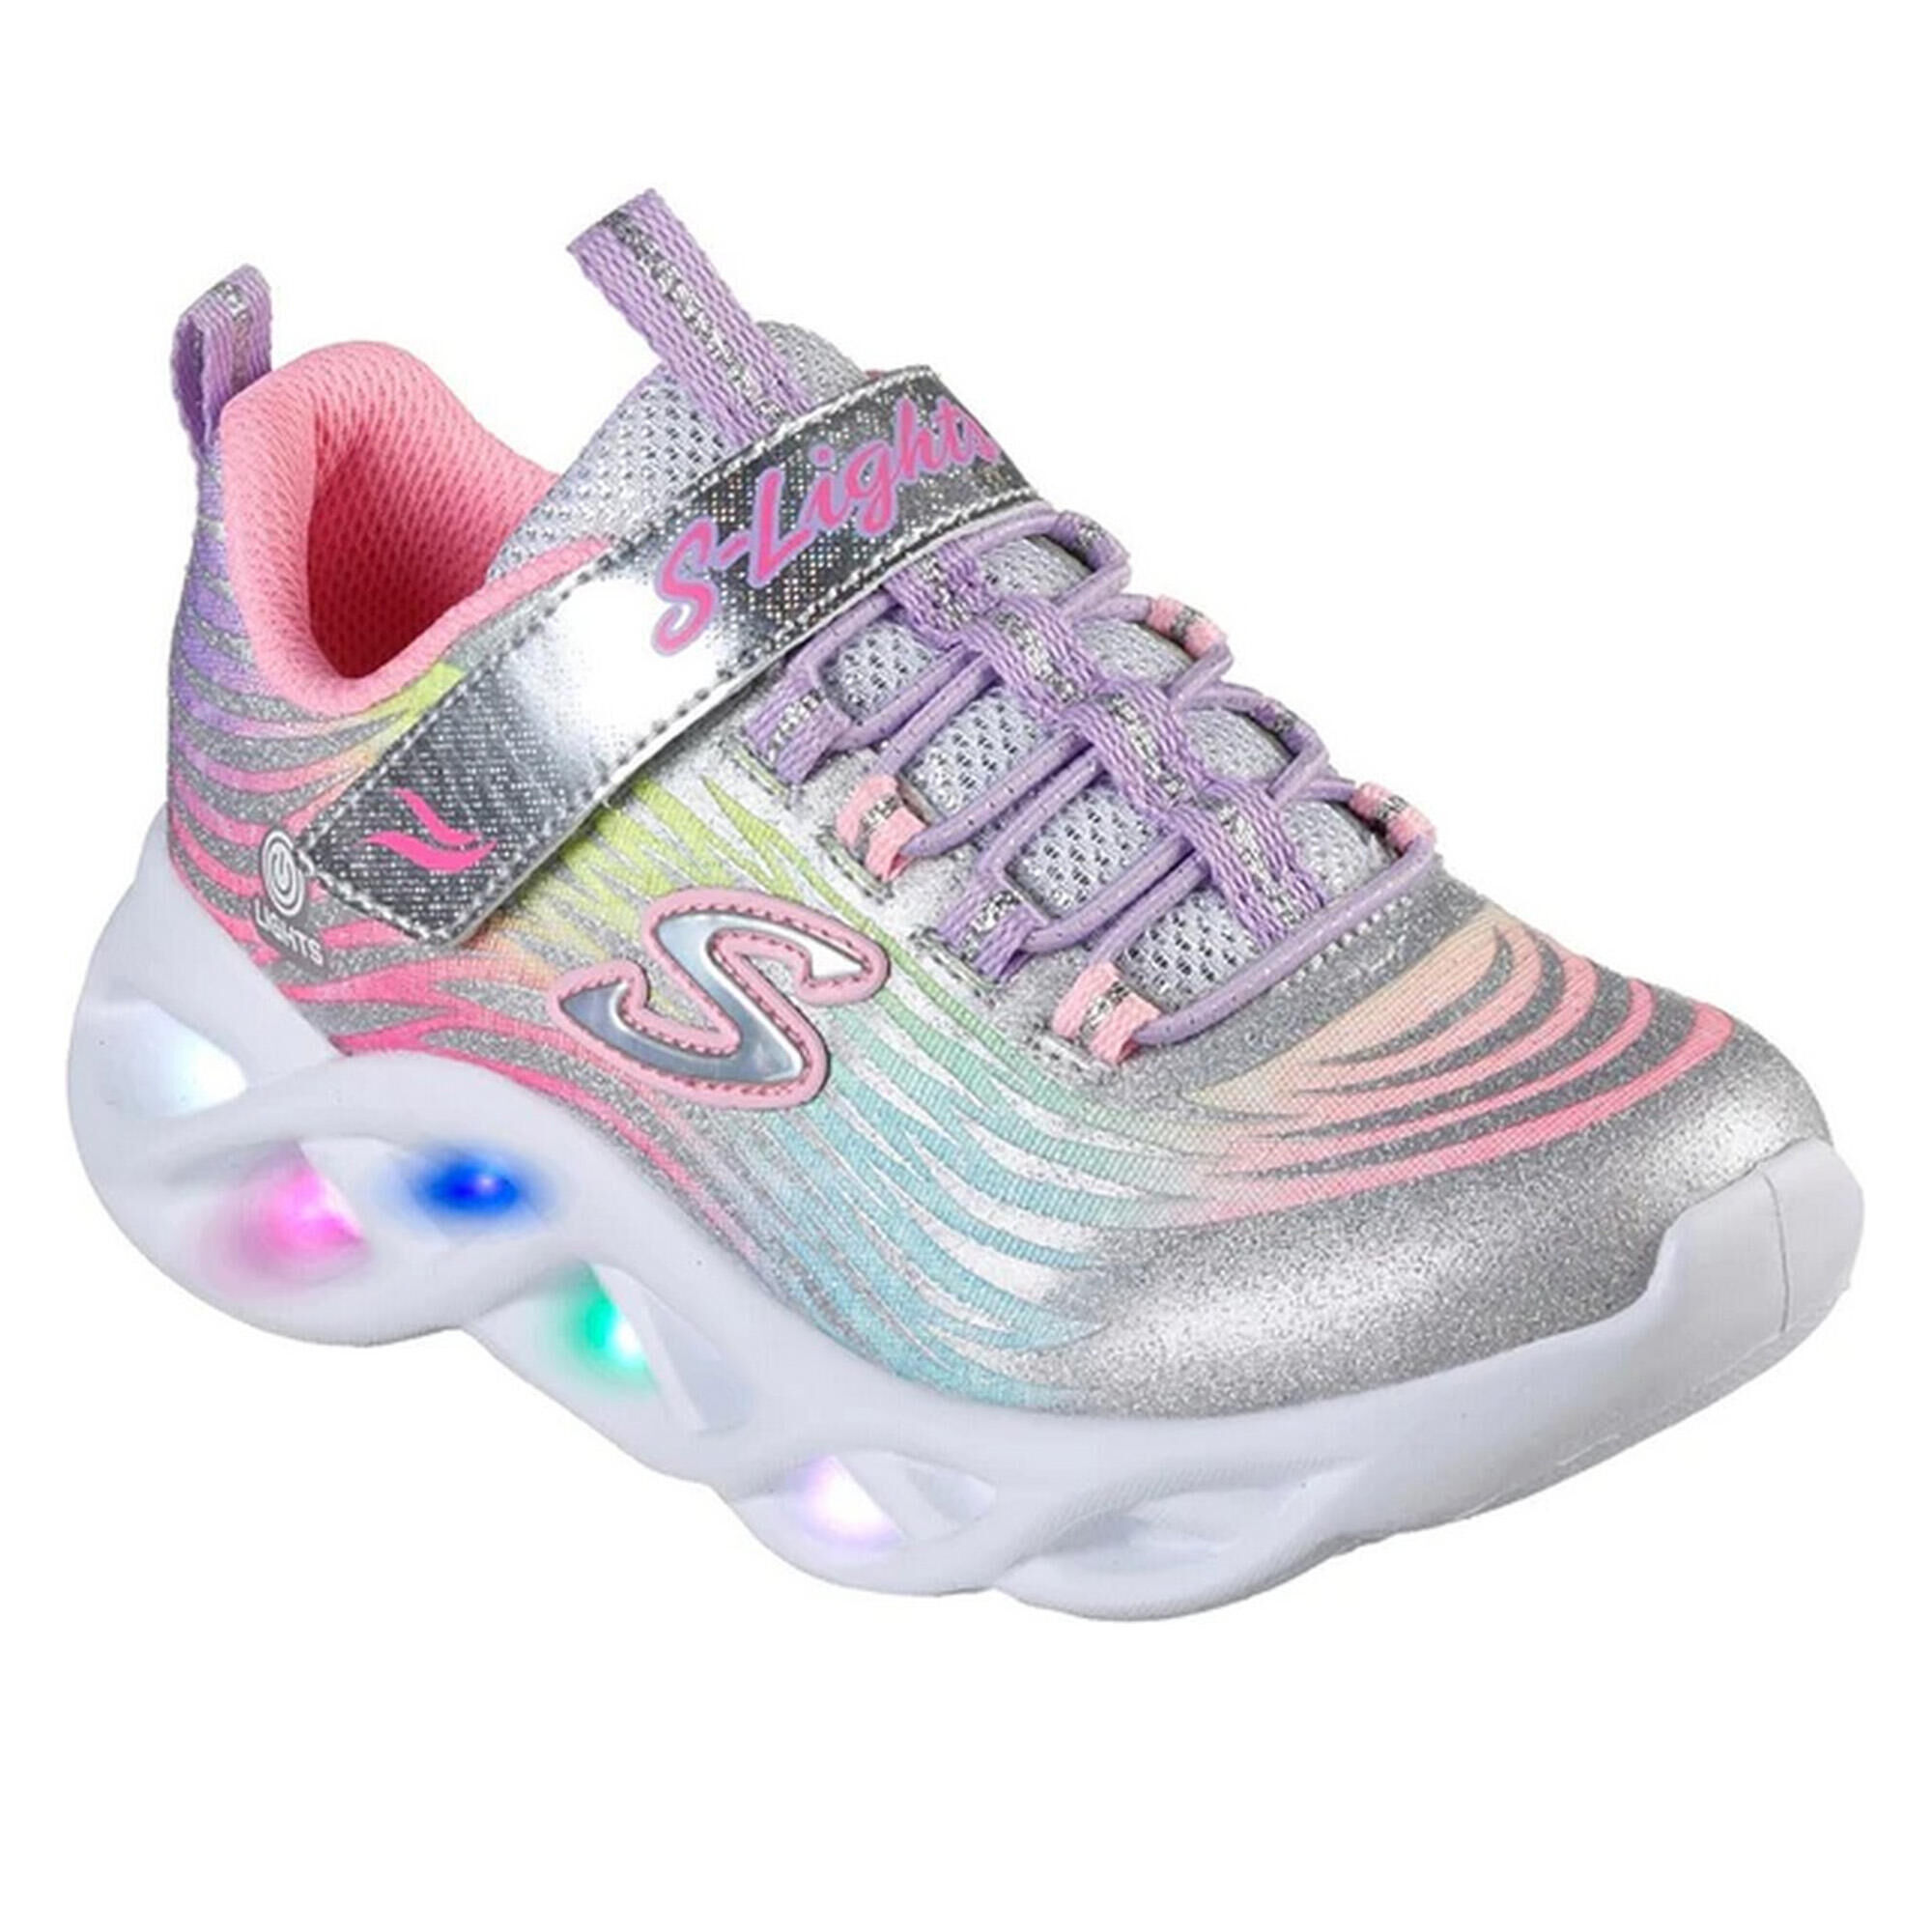 SKECHERS Girls S Lights Twisty Brights Mystical Bliss Trainers (Multicoloured)